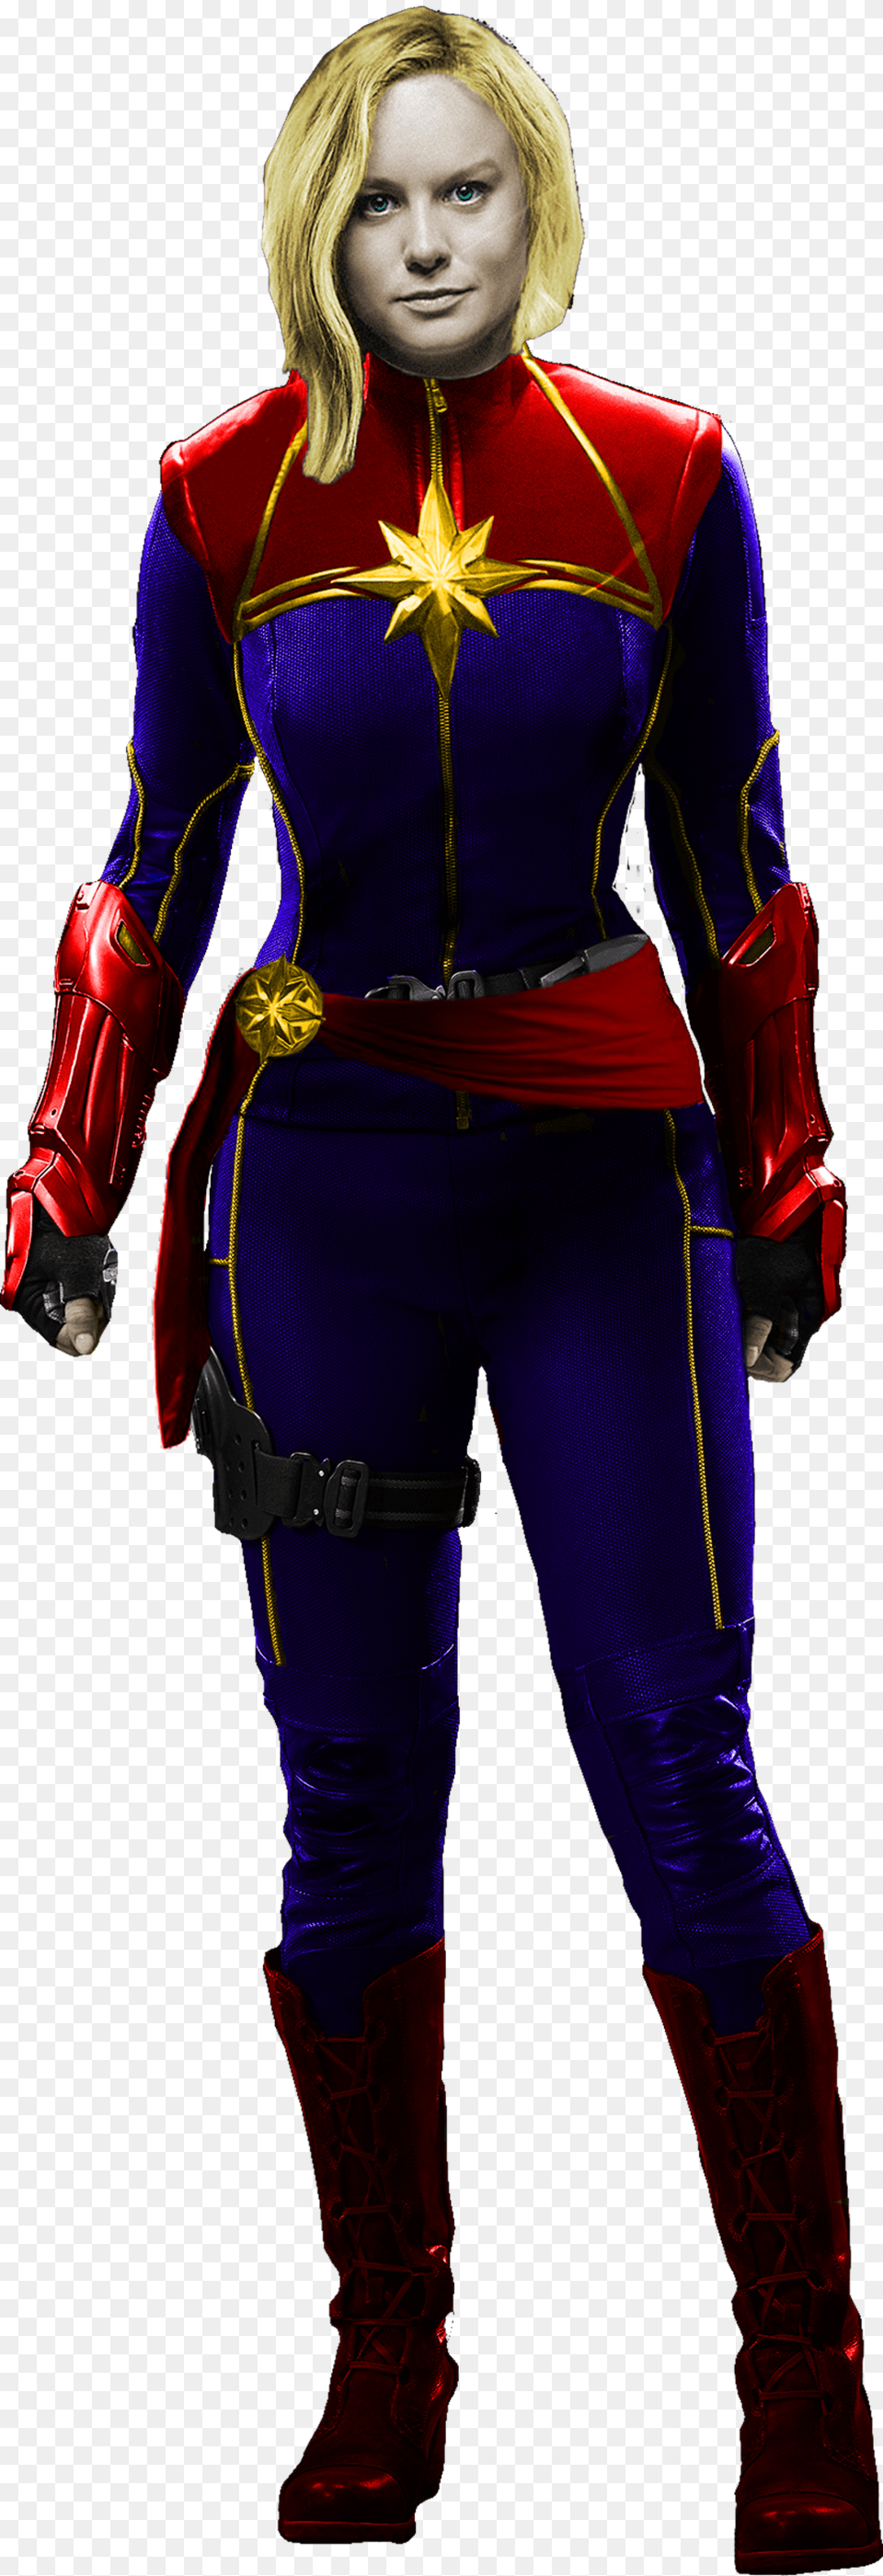 Marvel Captain Marvel, Clothing, Costume, Person, Adult Png